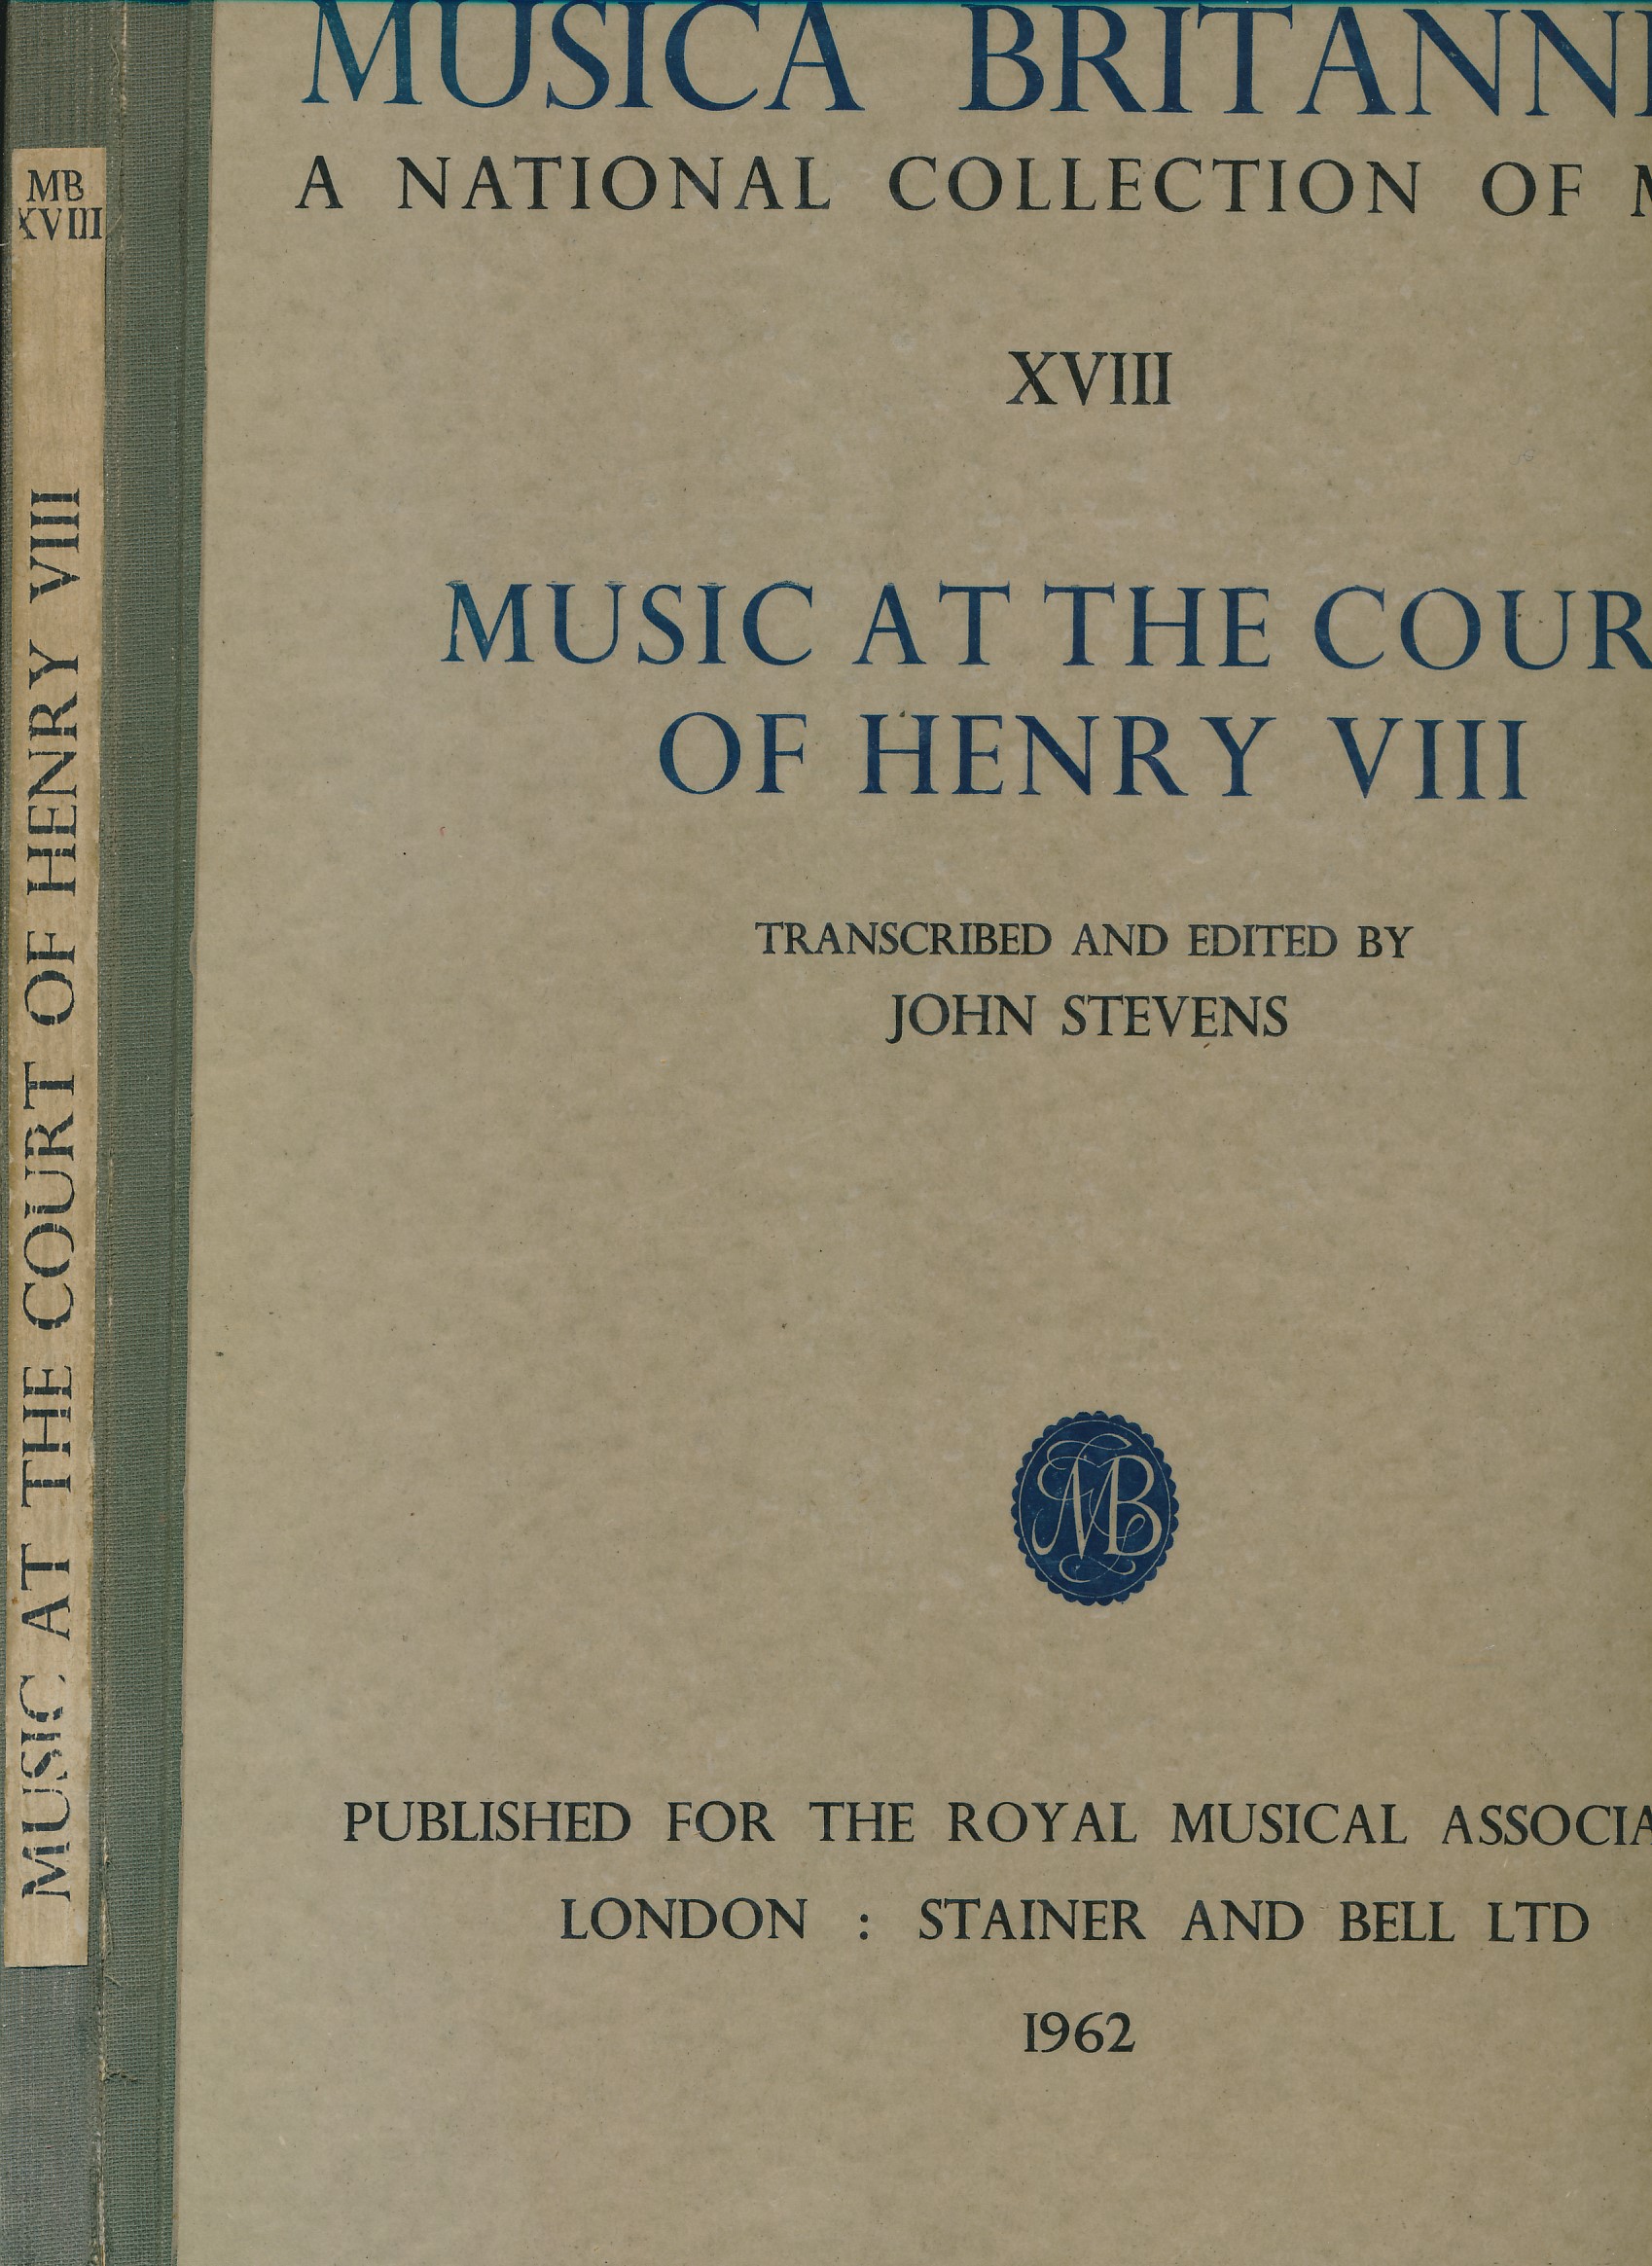 Musica Britannica. A National Collection of Music. Vol  XVIII. Music at the Court of Henry VIII